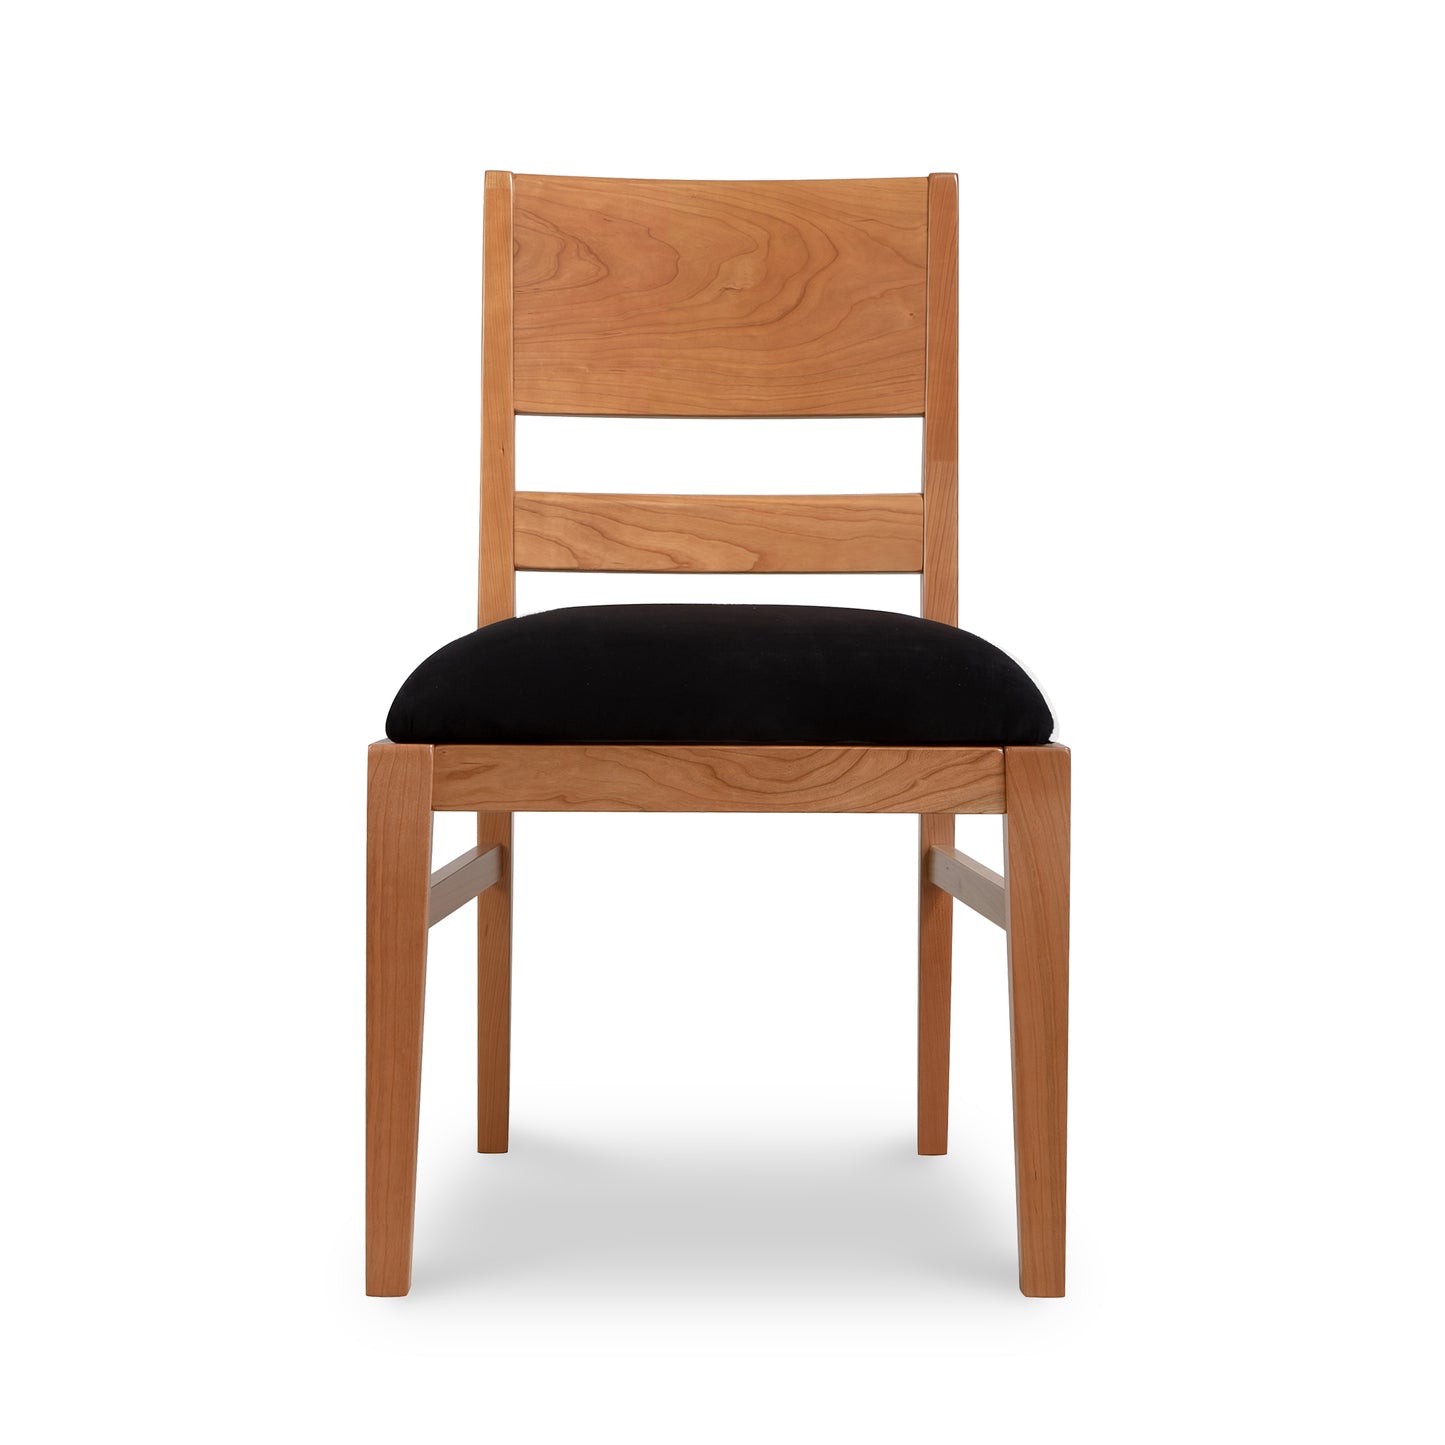 A Scandinavian inspired design Burke Modern Chair from Vermont Woods Studios made of natural solid wood with a black cushion on a white background.